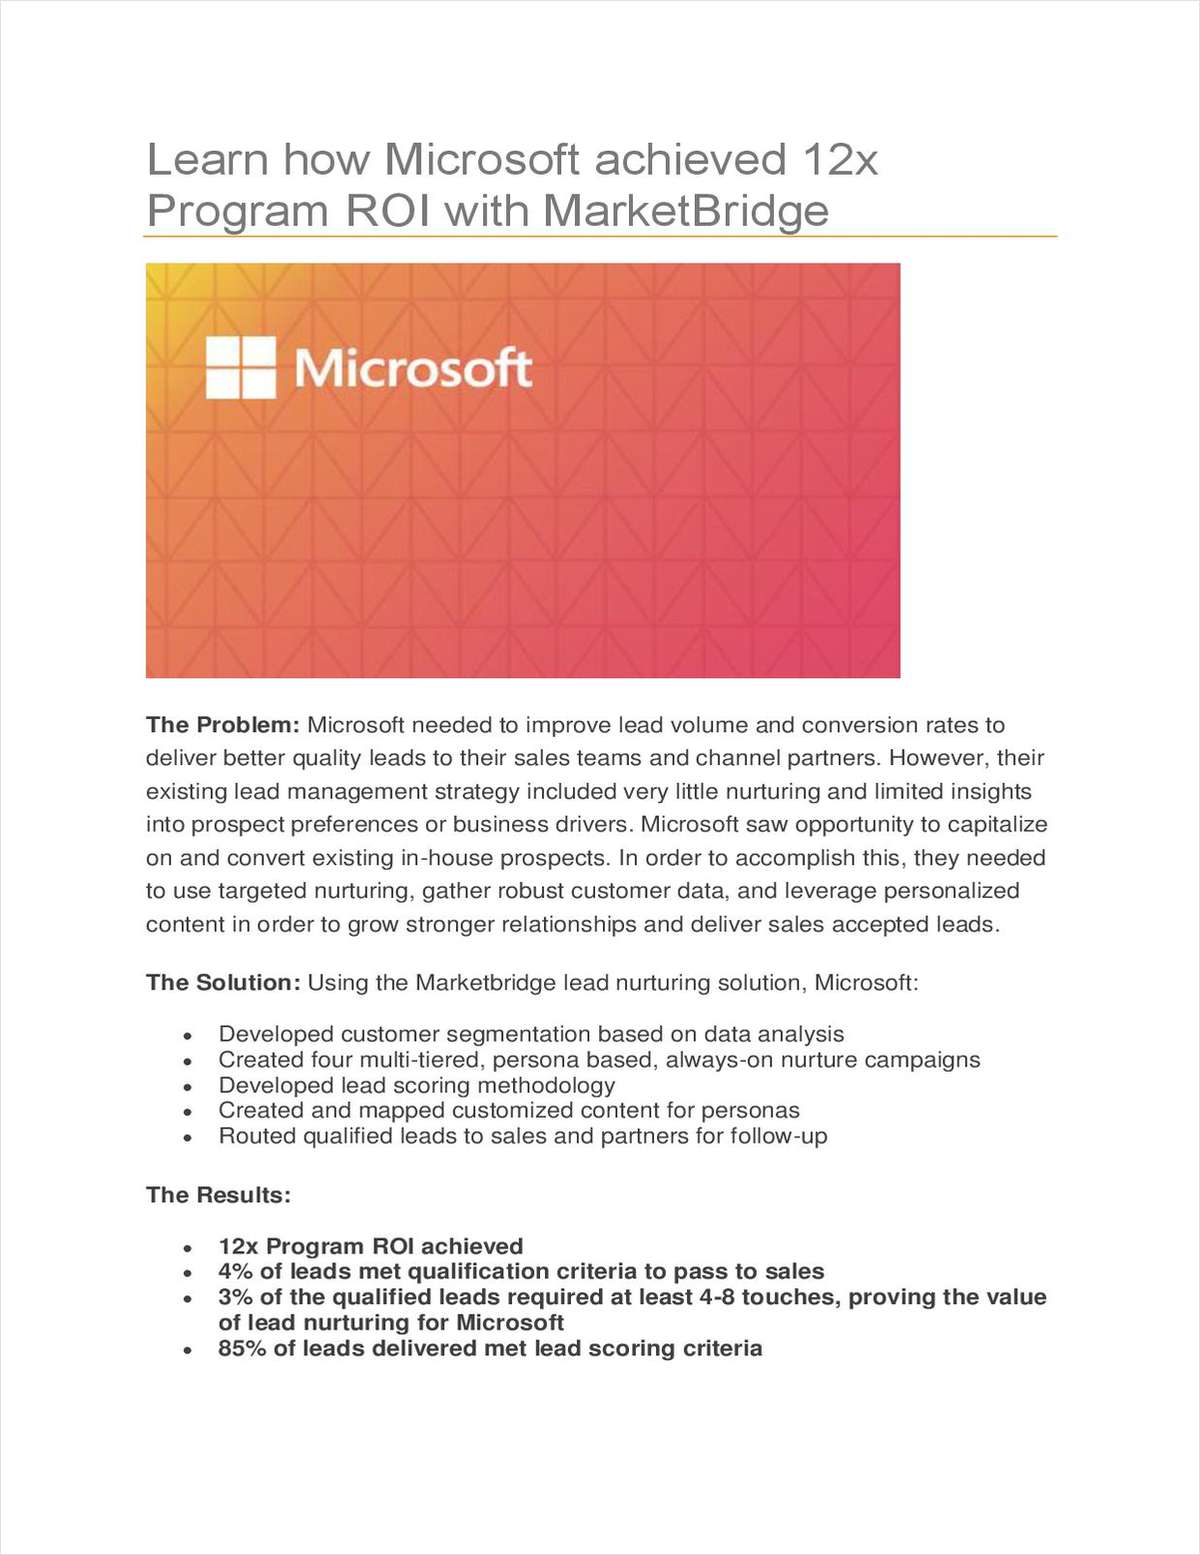 Learn how Microsoft was able to Achieve a 12x Program ROI